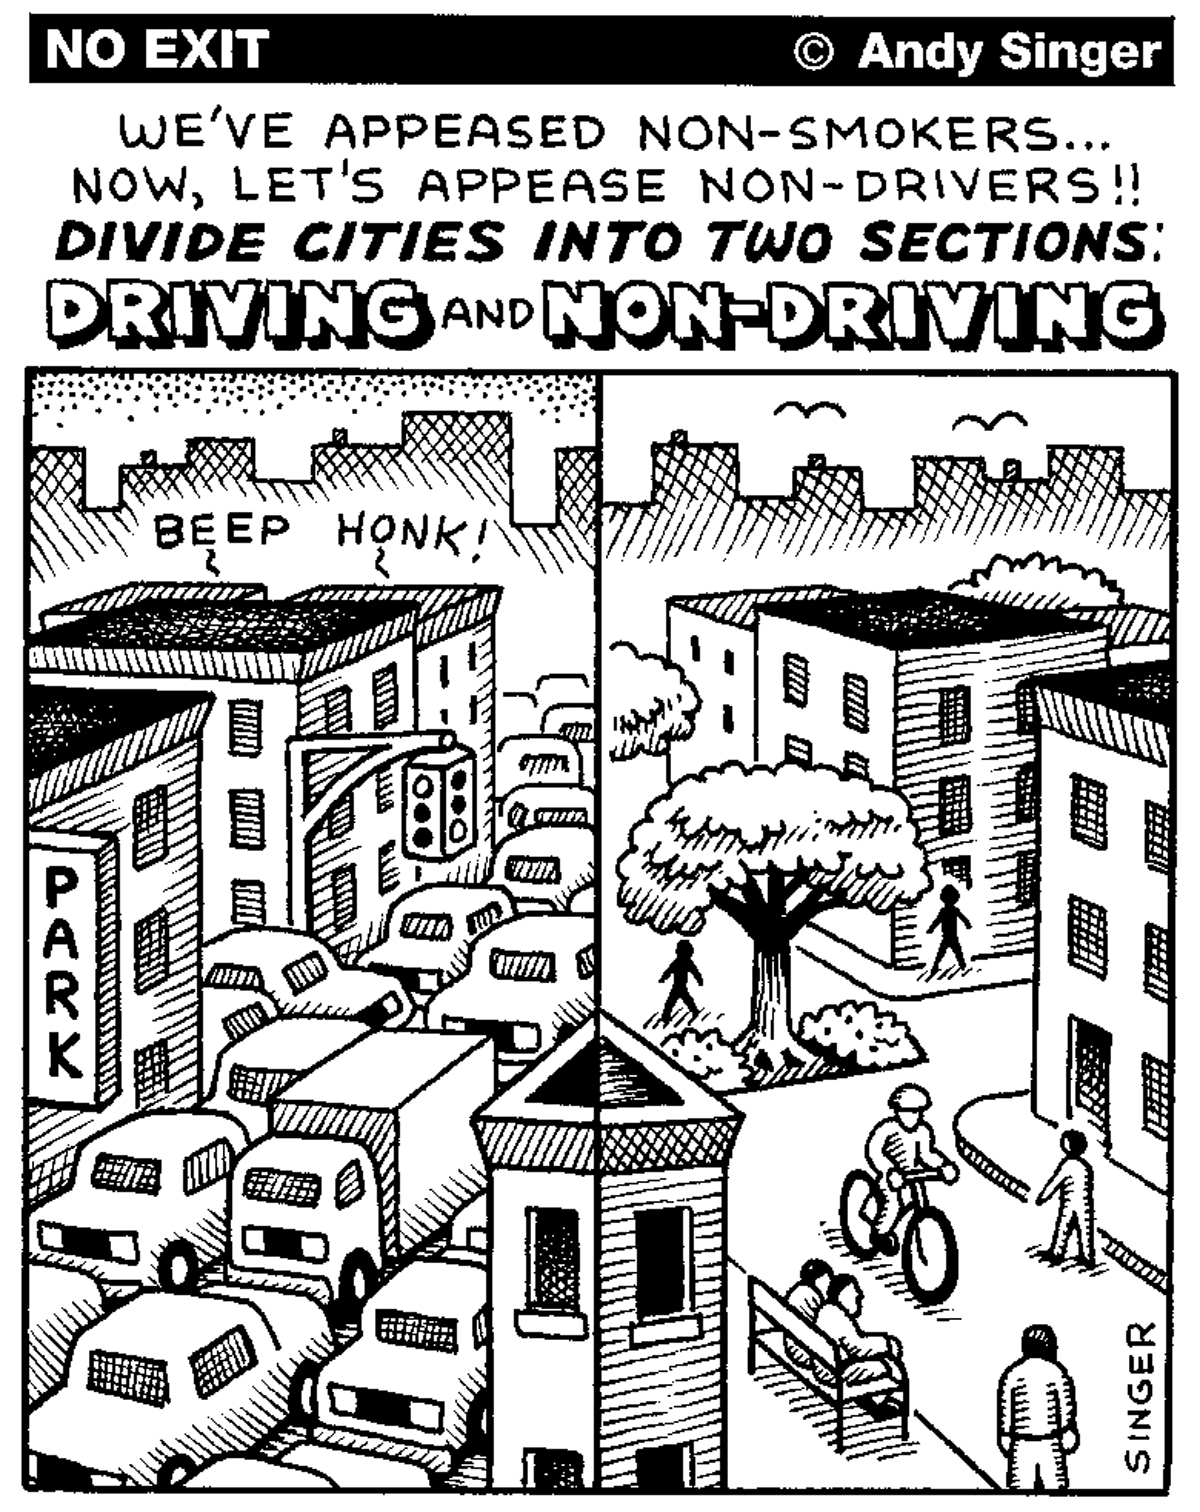 No Exit Bicycle Cartoon: Driving & Non-Driving